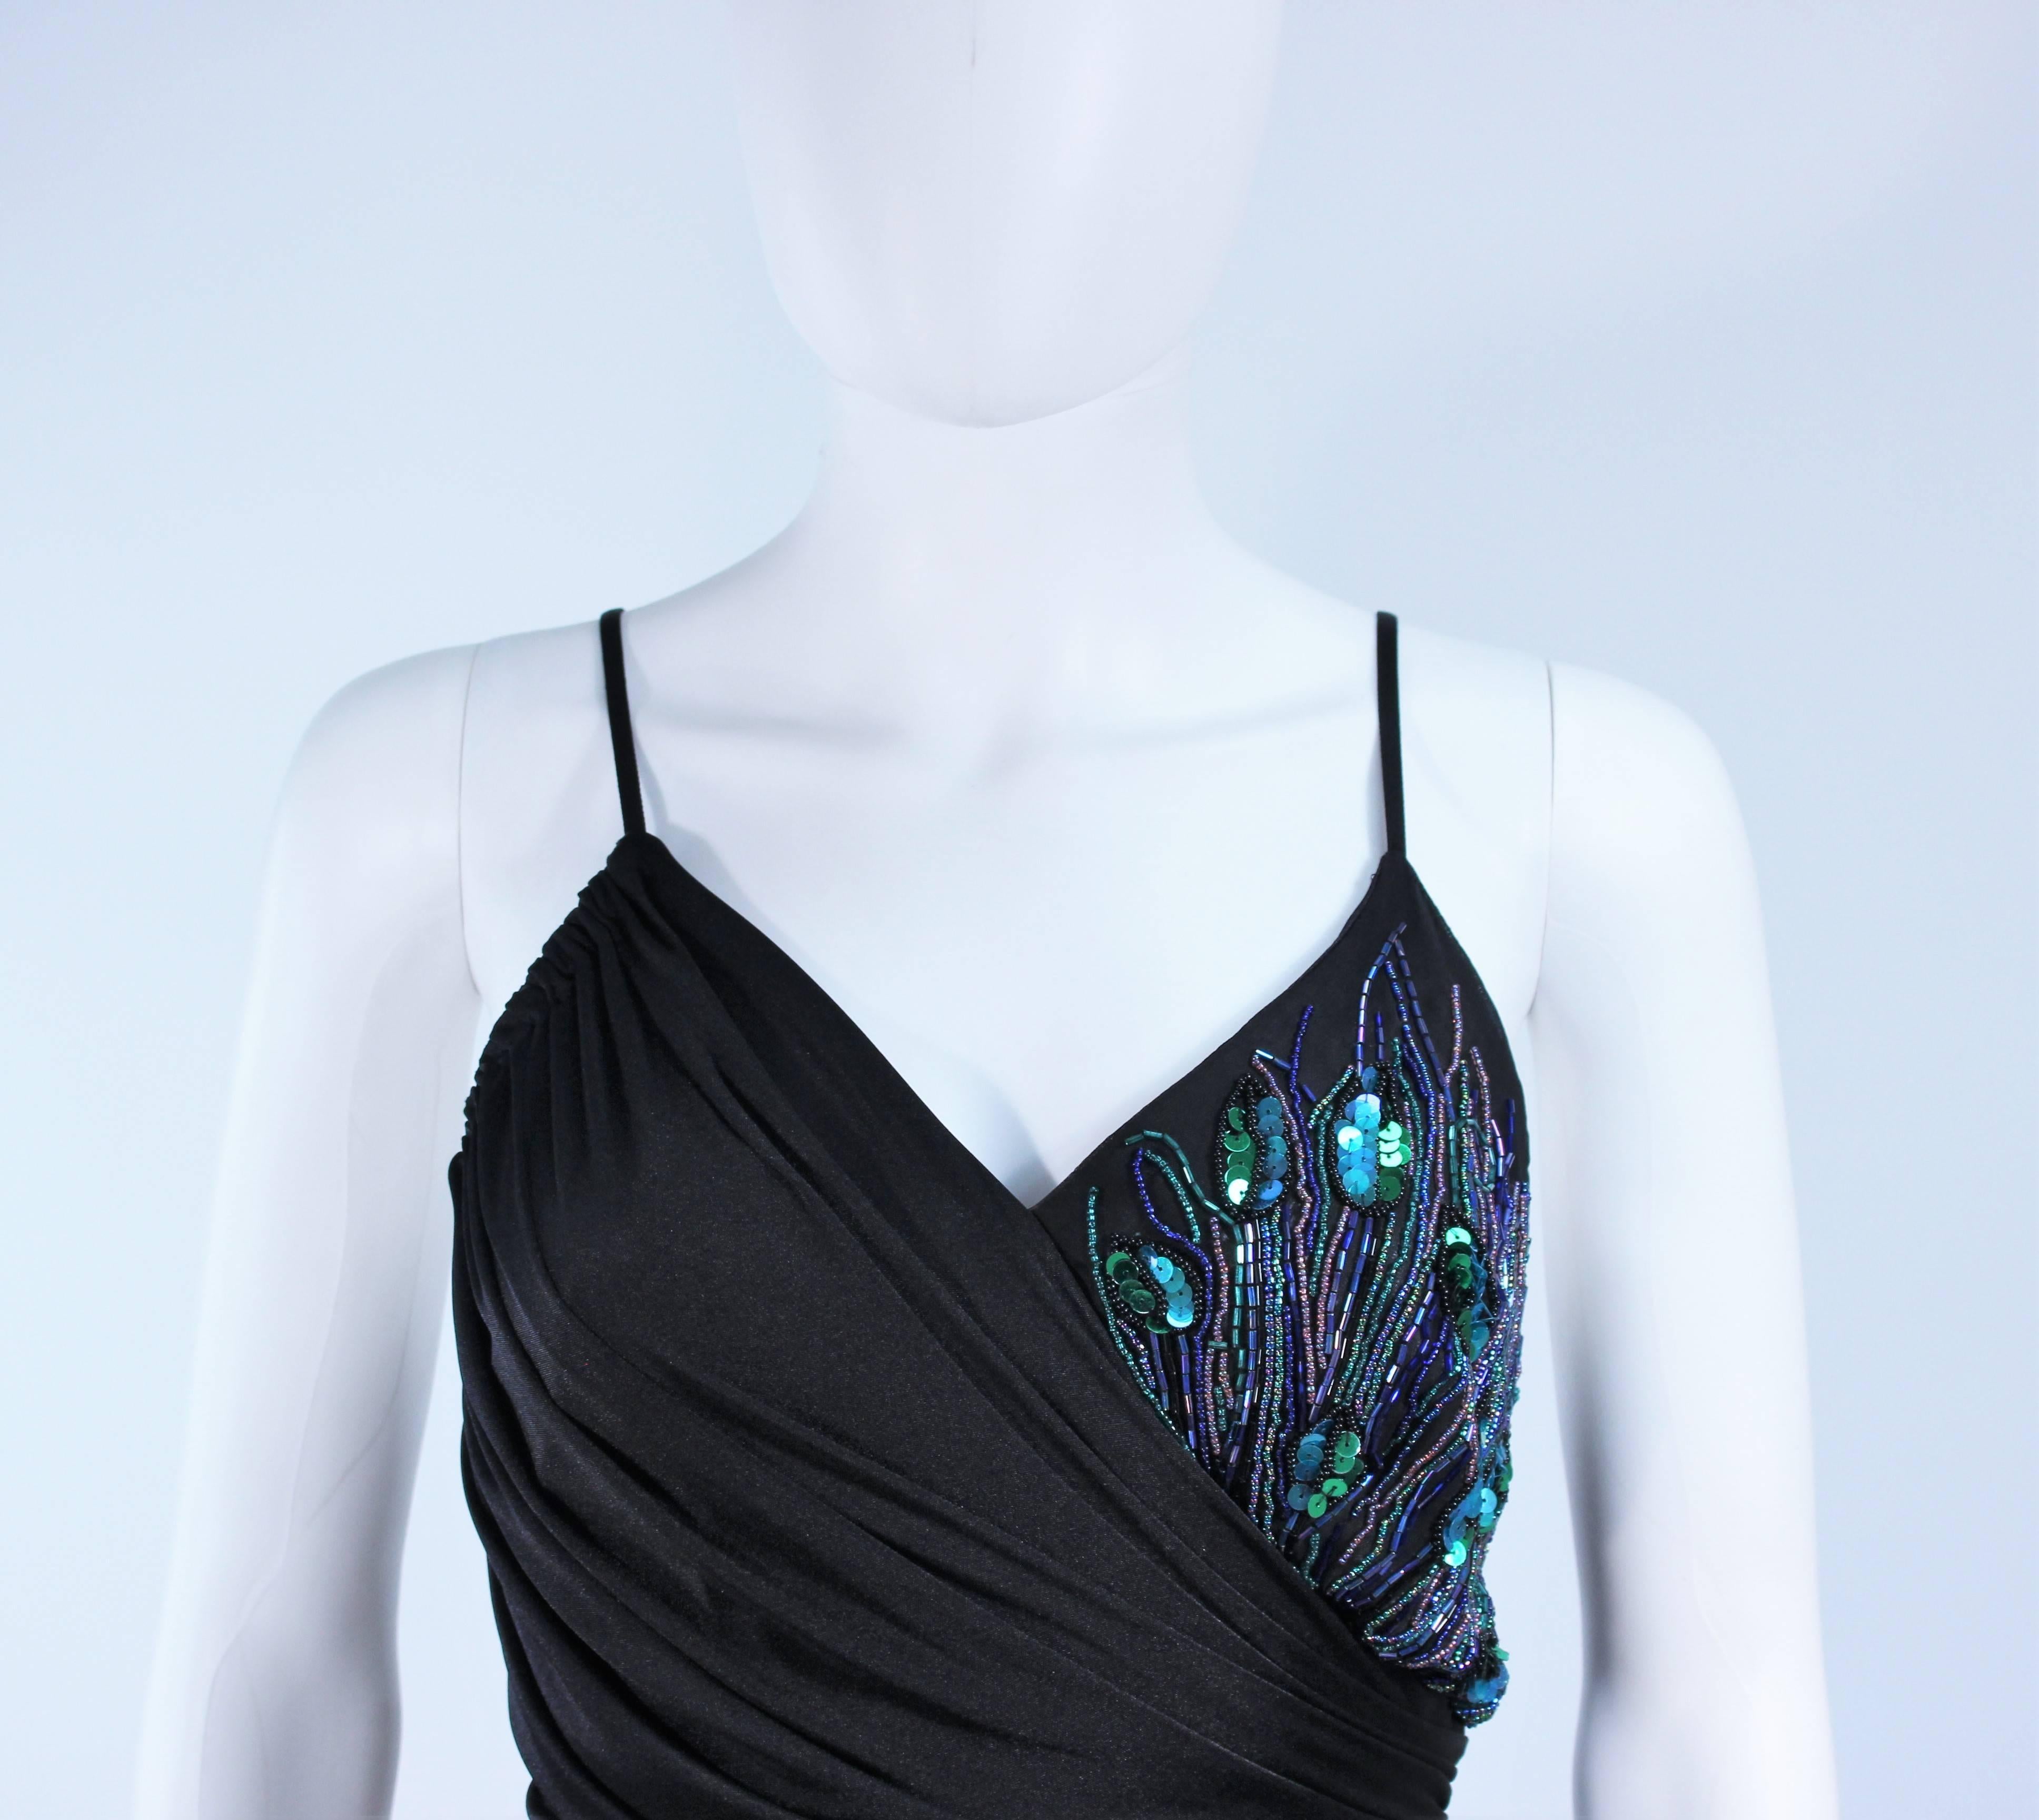 Women's ABBEY KENT Black Draped Jersey Cocktail Dress with Iridescent Sequin Applique 10 For Sale